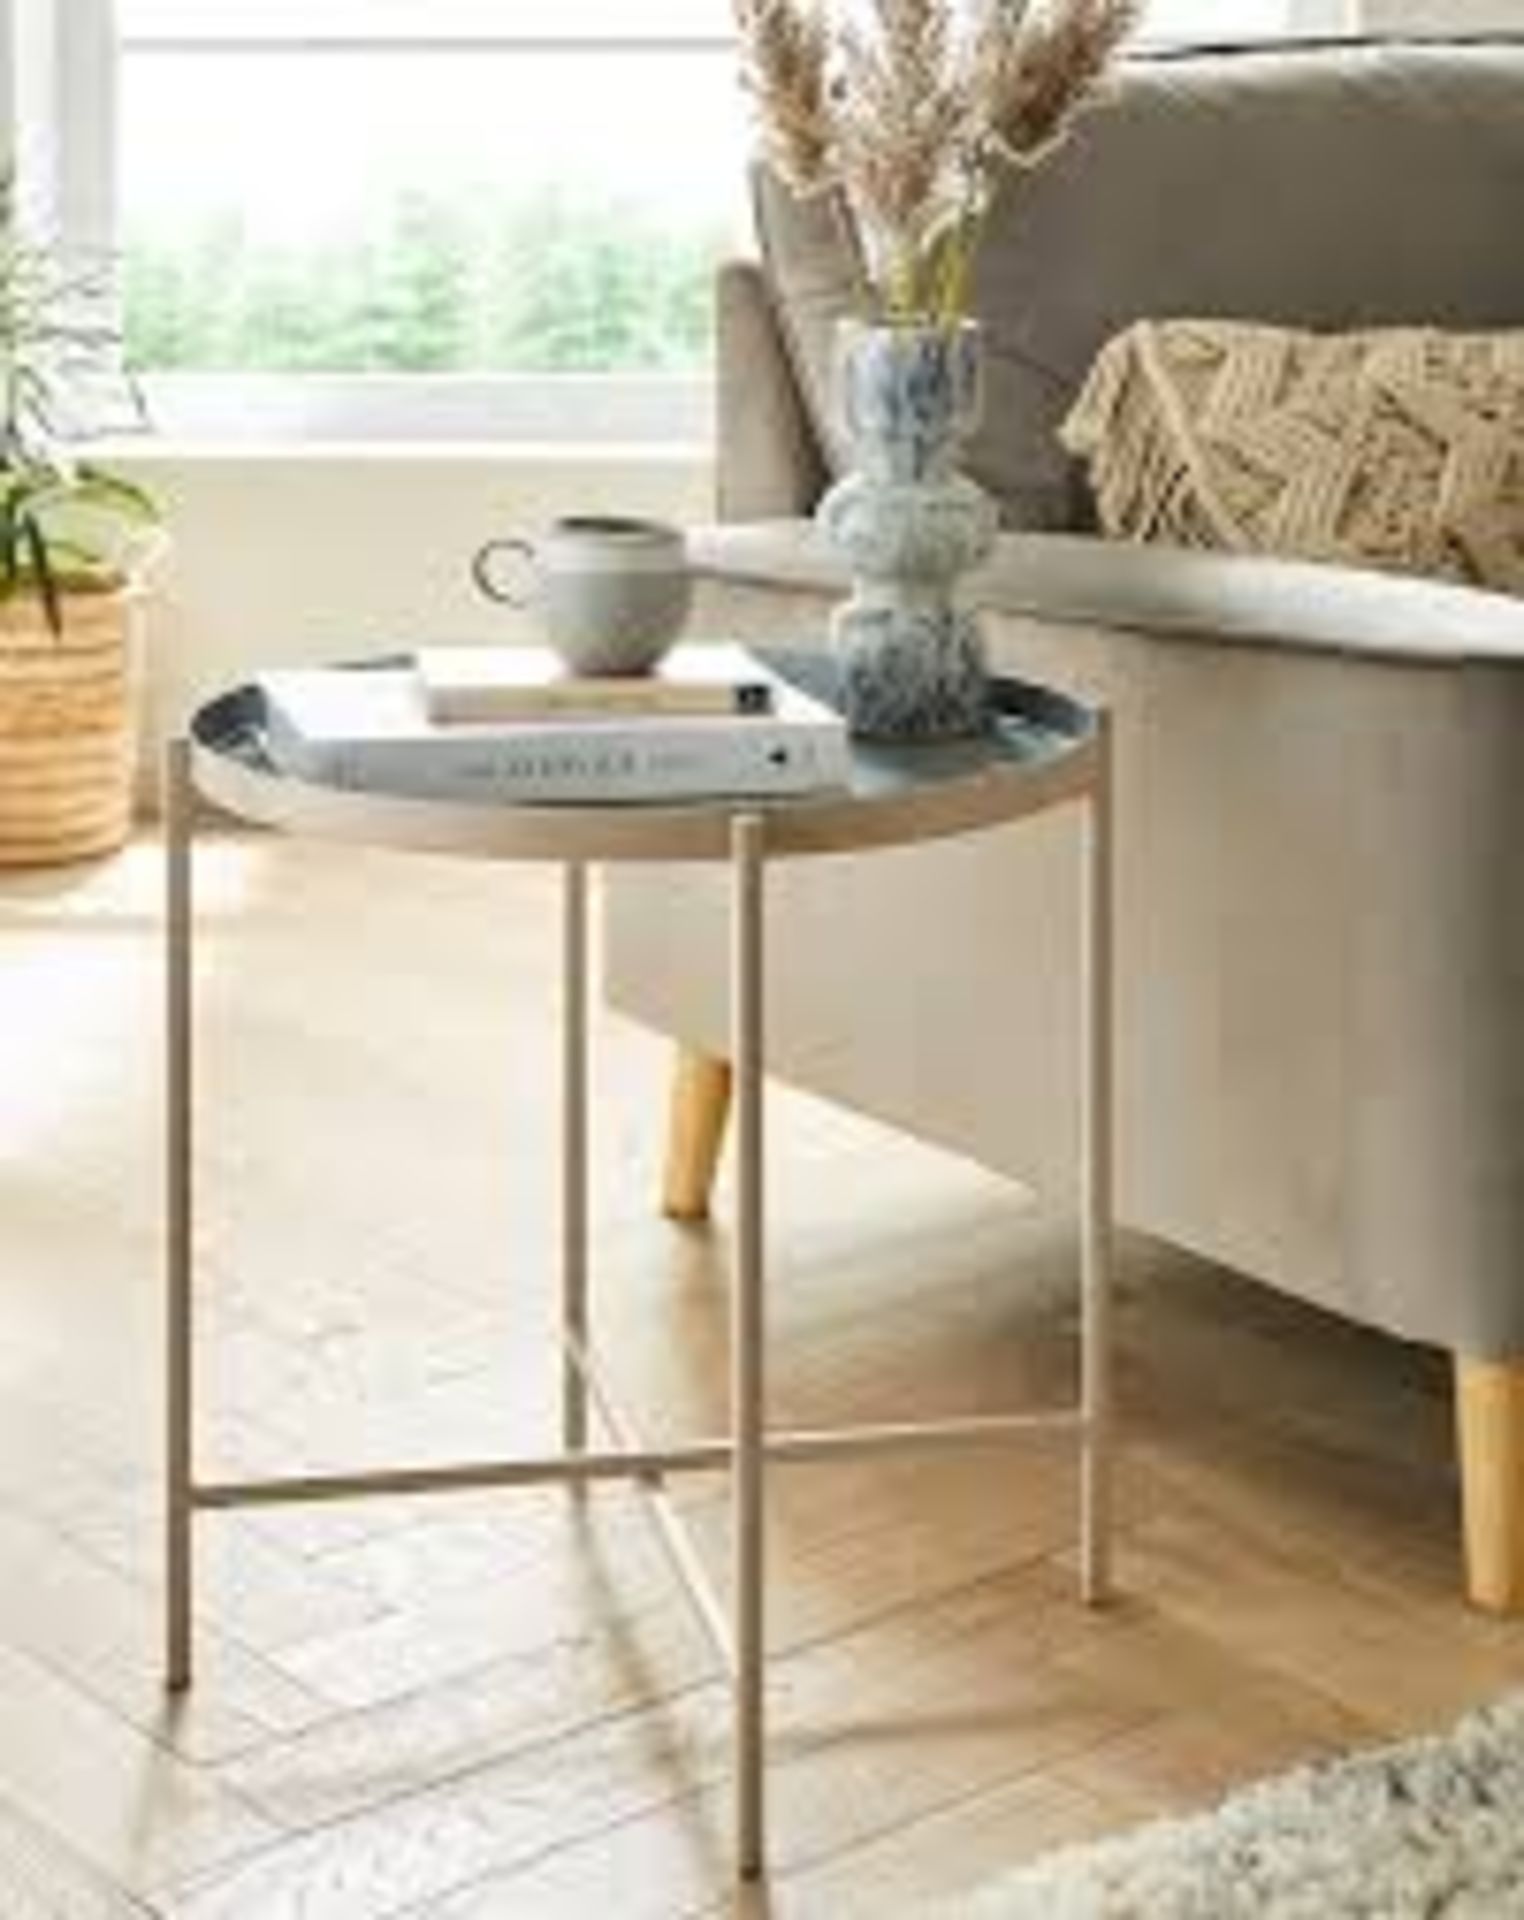 RRP £89 - ZURI SIDE TABLE GREY - Image 2 of 2